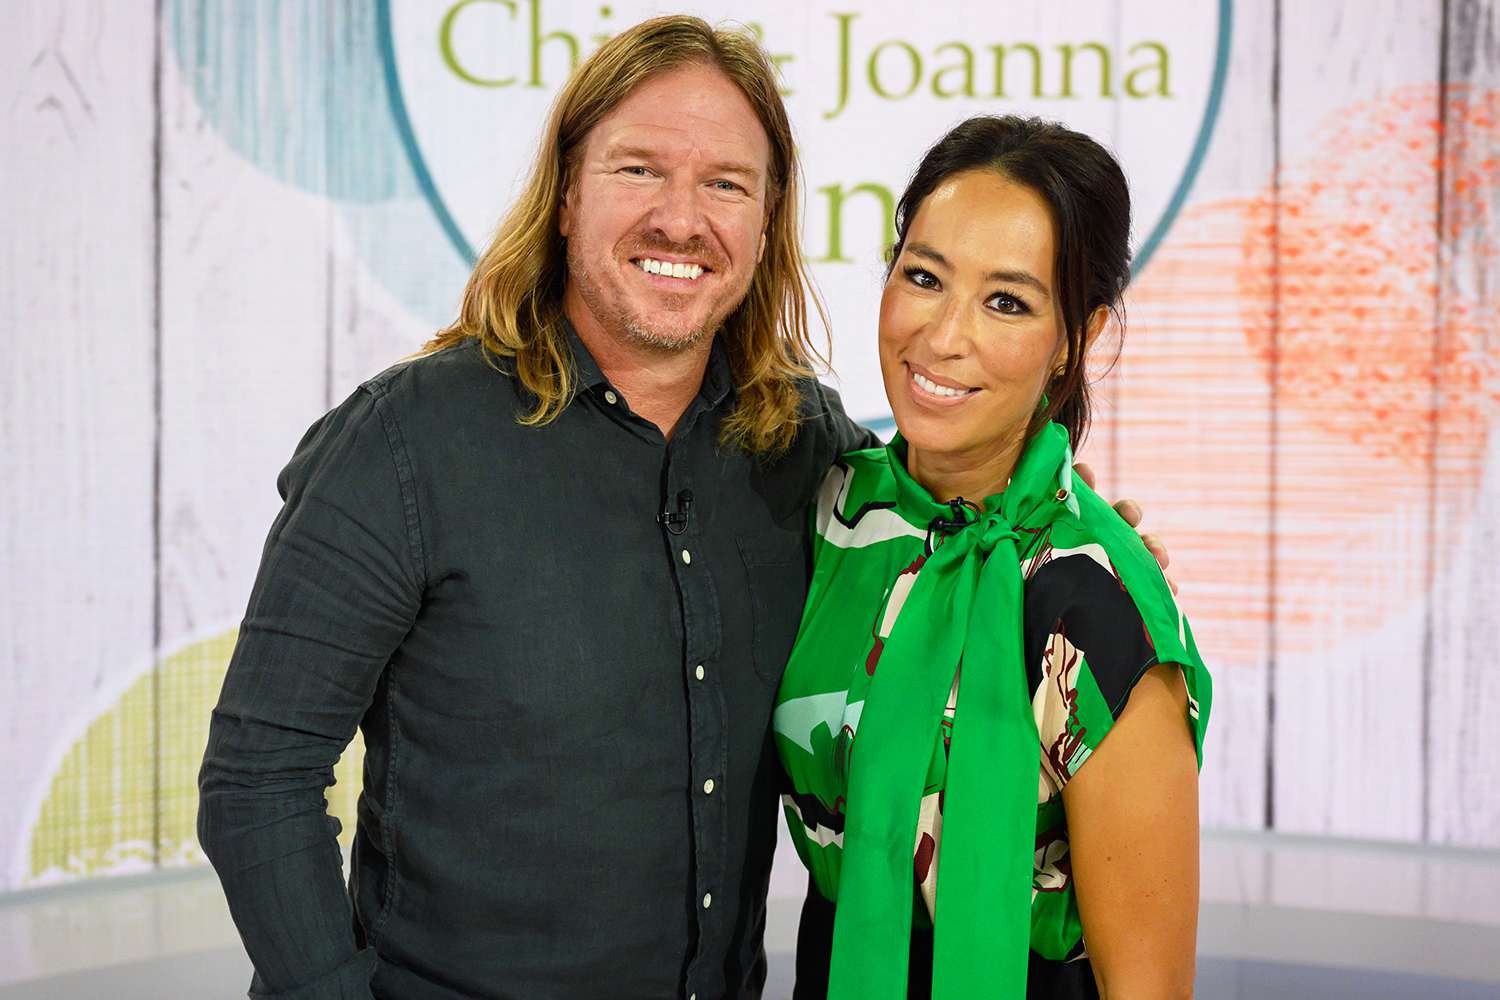 Joanna Gaines, 농장 동물에게 먹이를 주는 Husband Chip 클립 공유: 'A Man and His Chickens'